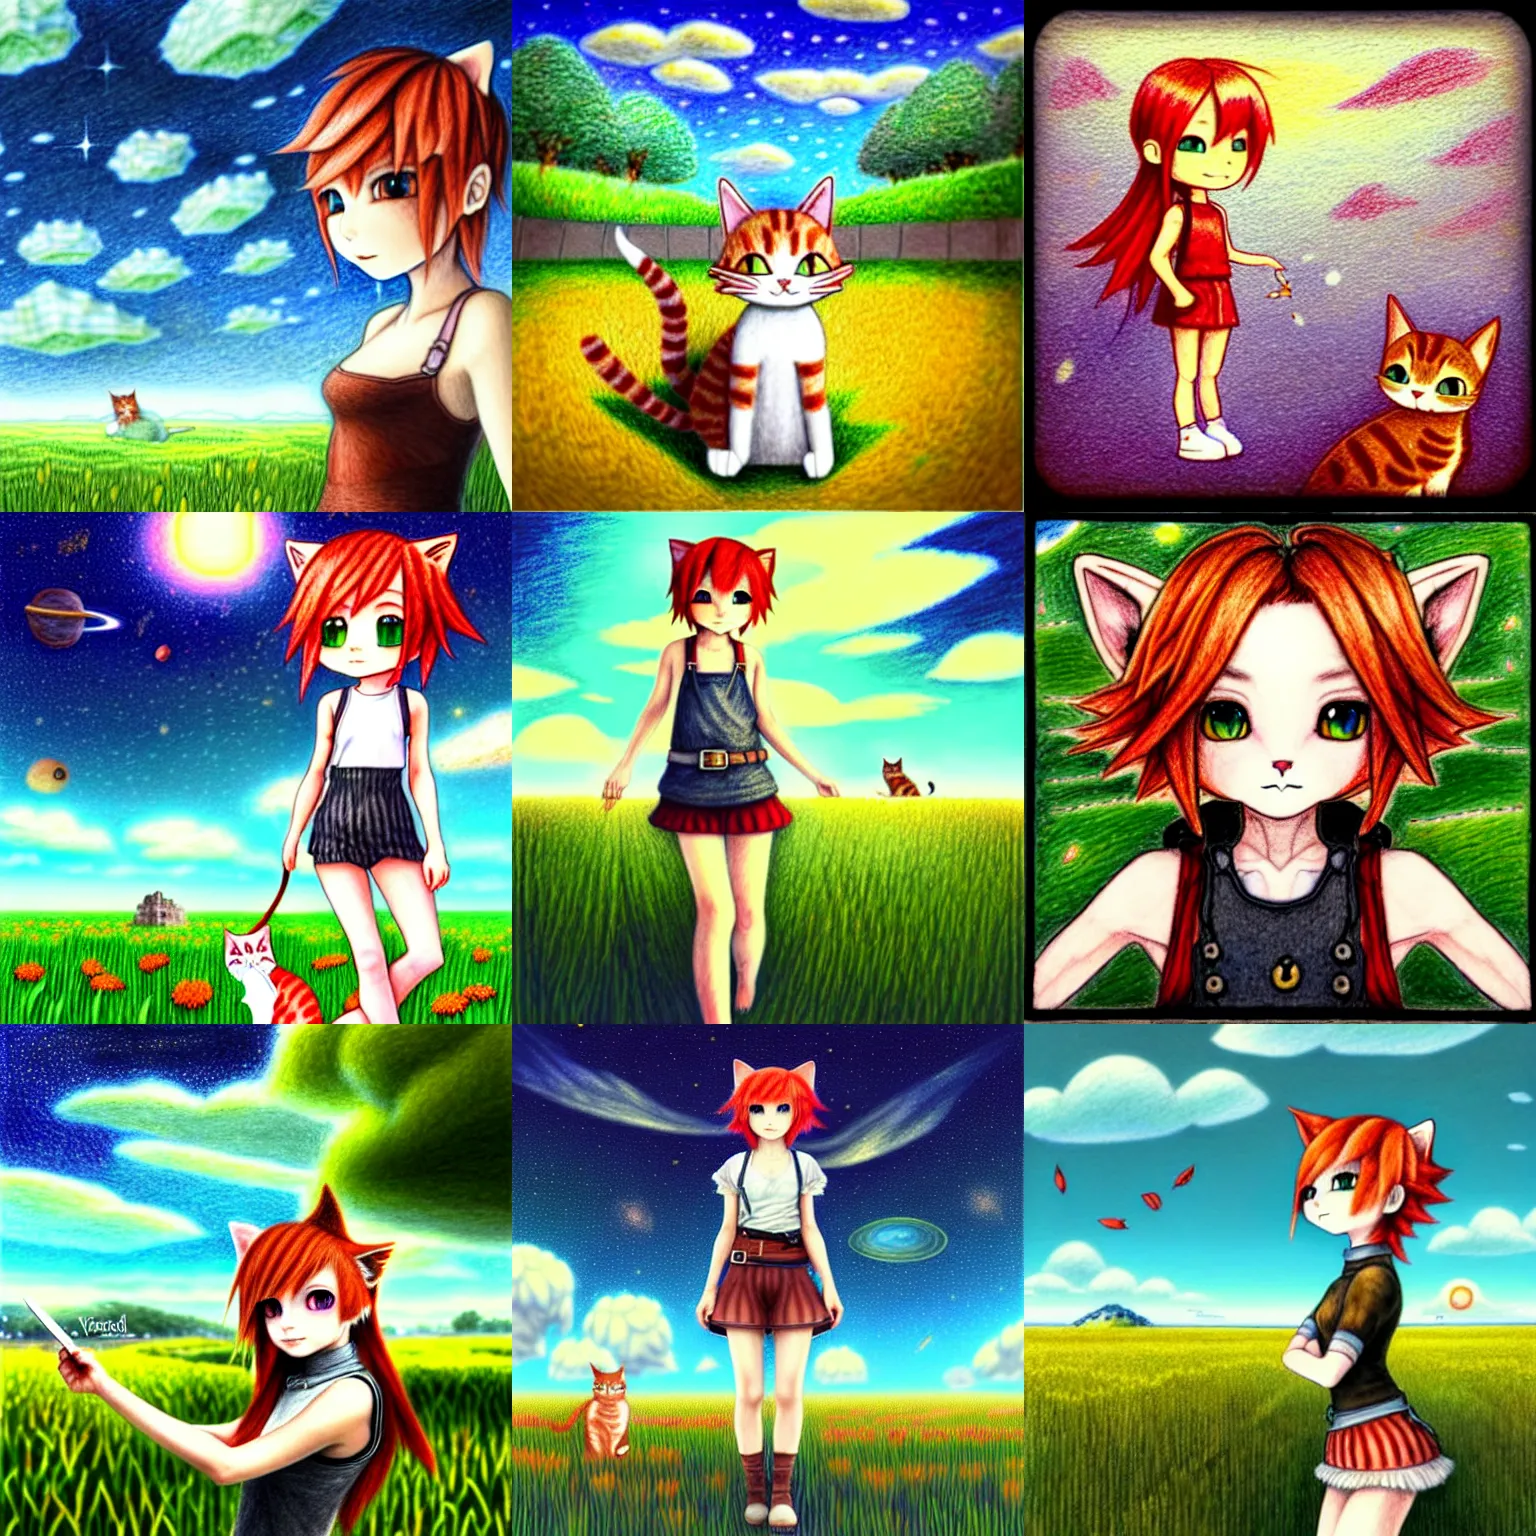 Prompt: an absurdly-detailed colored-pencil drawing as a fancy square tile, a cute adventurer, a short-red-haired cat-girl painted in final fantasy style, wearing a simple outfit. Summer sun in verdant fields. | THE SKY | THE SKY | THE SKY | THE SKY | THE SKY | THE SKY | THE SKY | SPACE WITH A CRACK IN IT | I don't know I'm bored